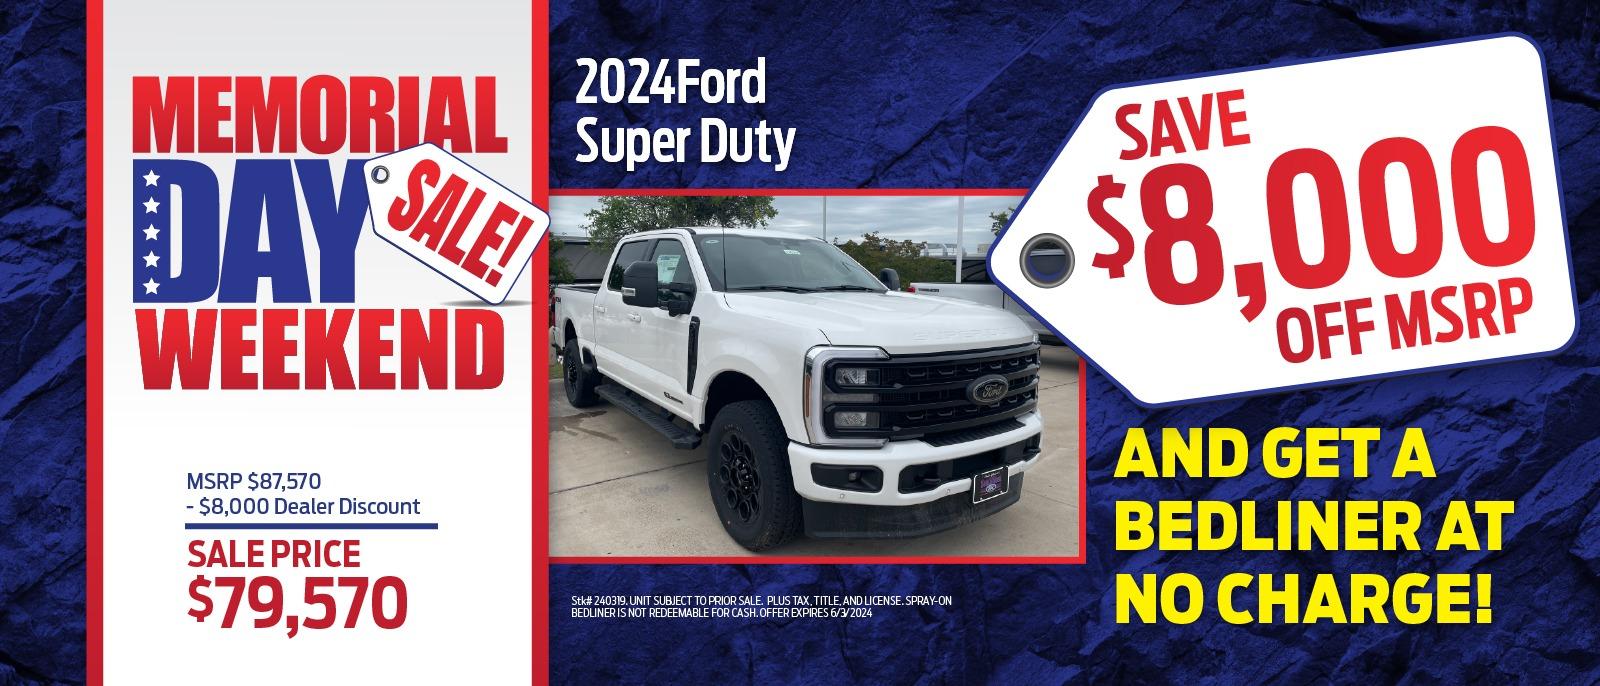 2024 Ford Super-Duty
Save $9,000 Off MSRP